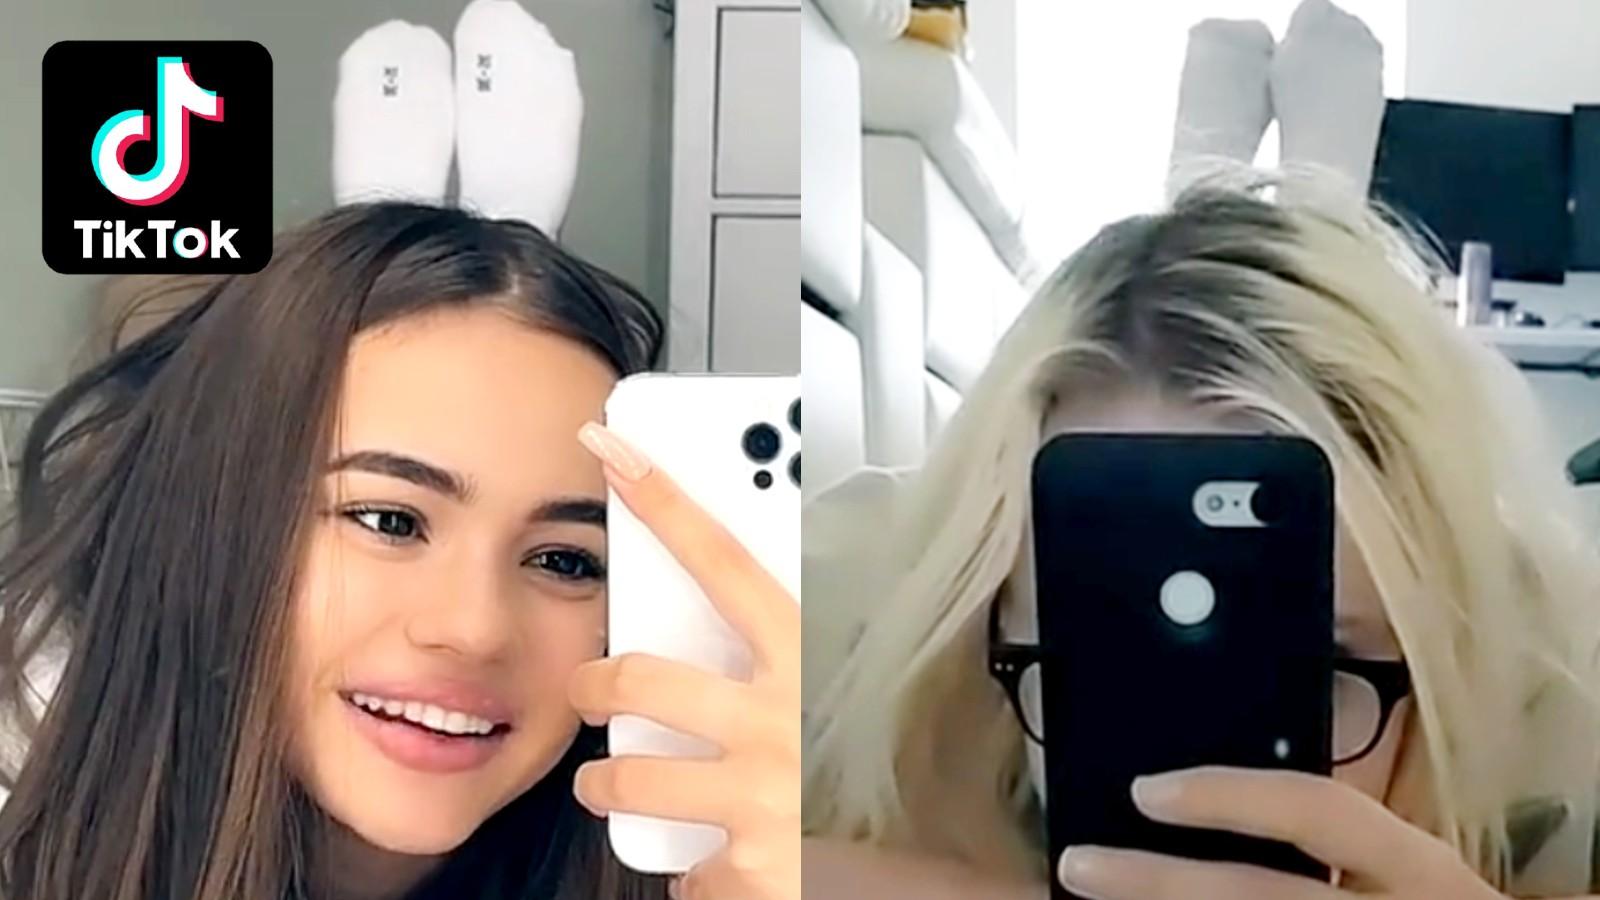 Two girls participate in the Bugs Bunny TikTok trend